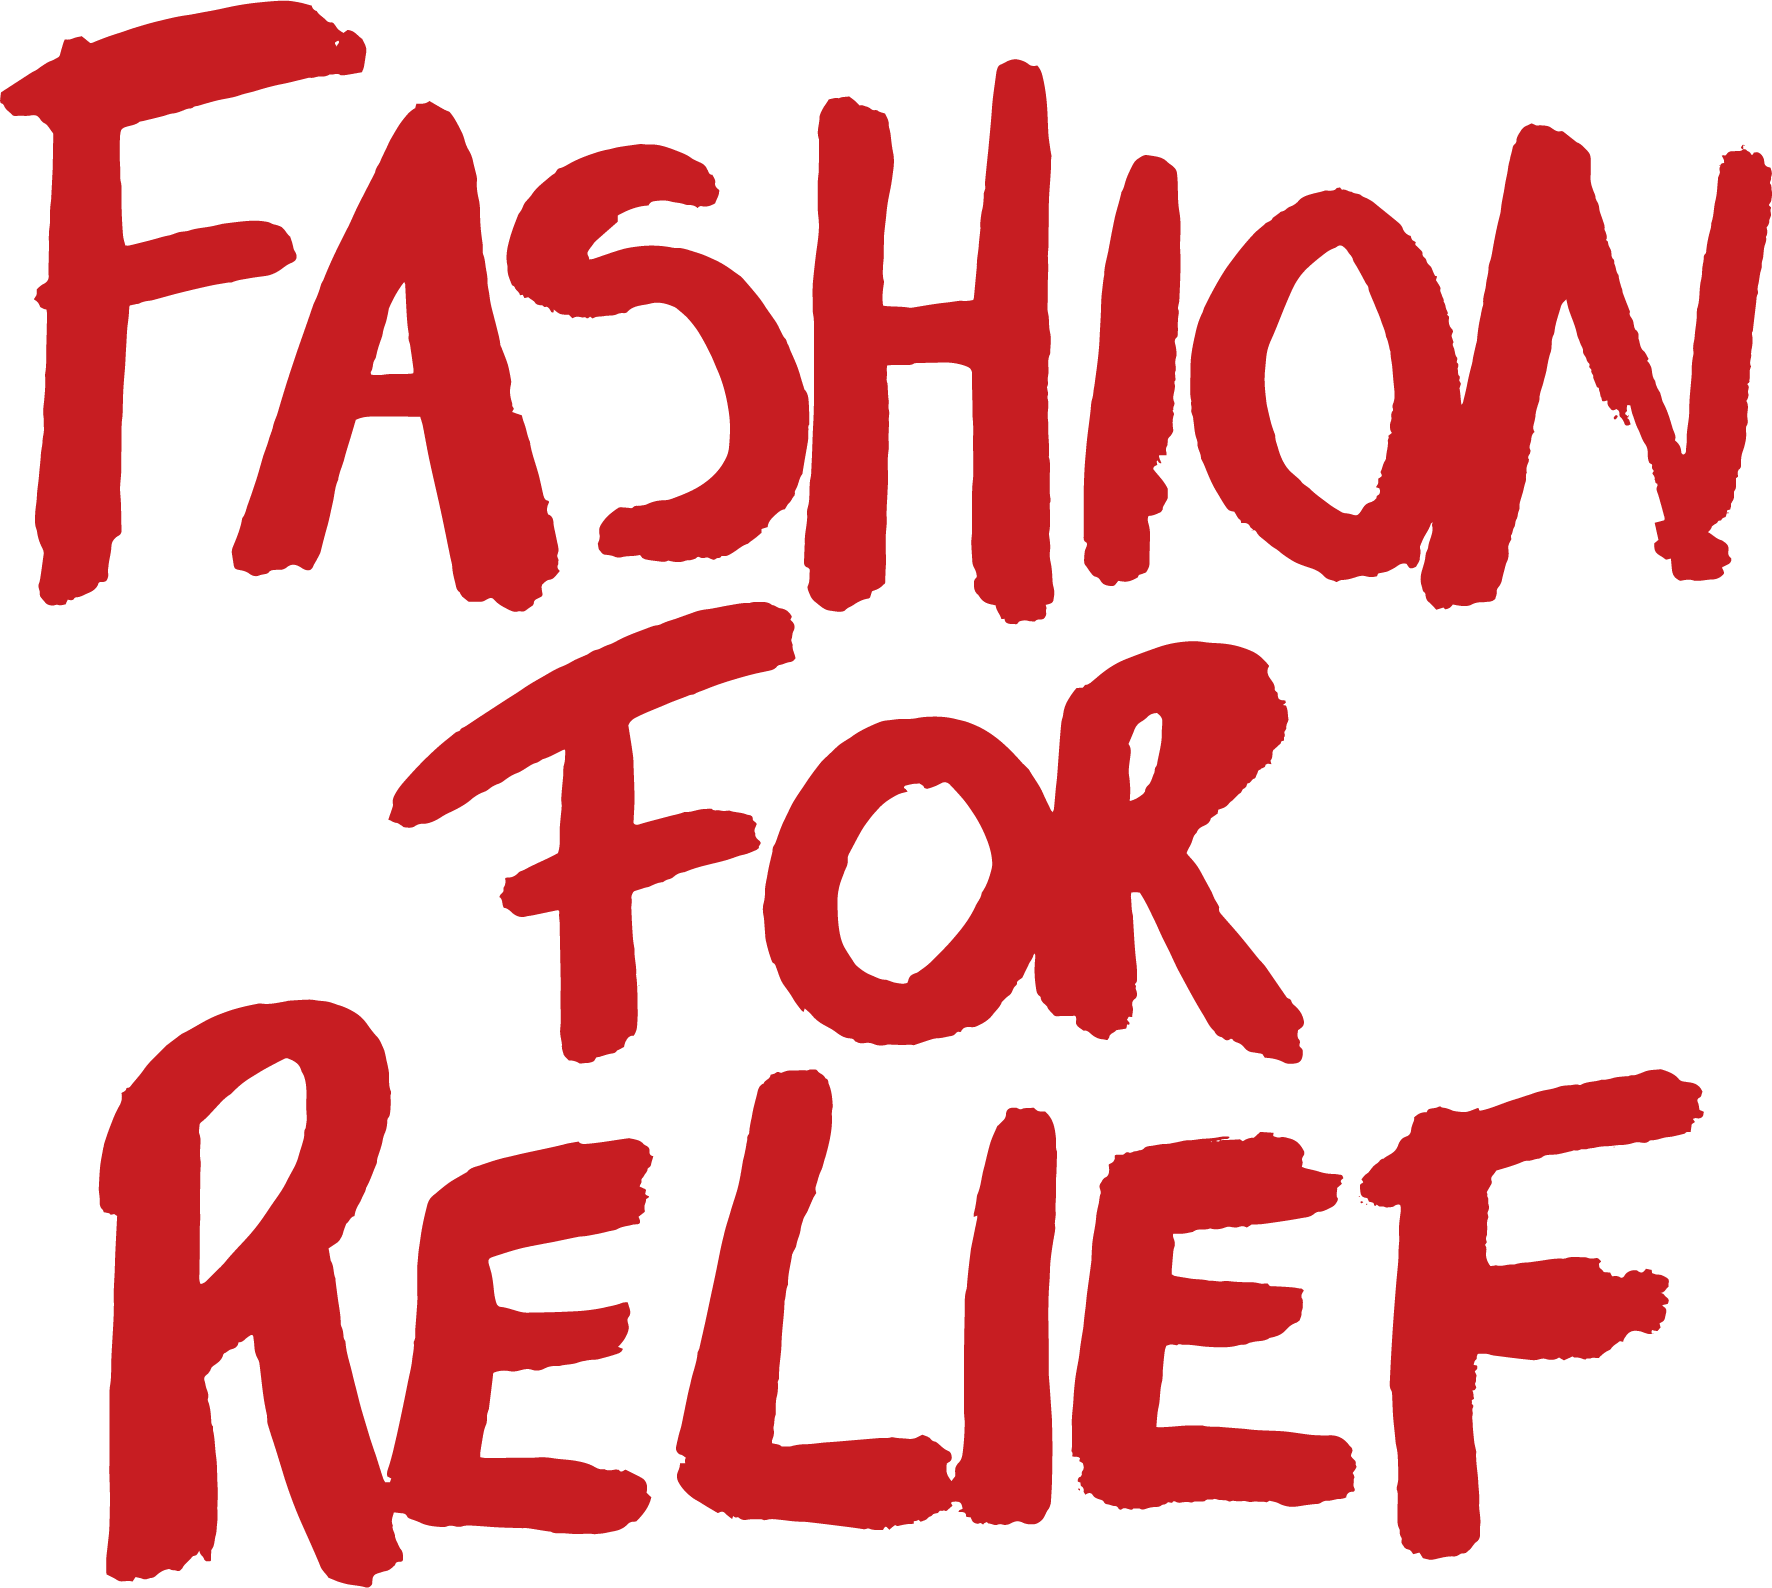 Fashion For Relief